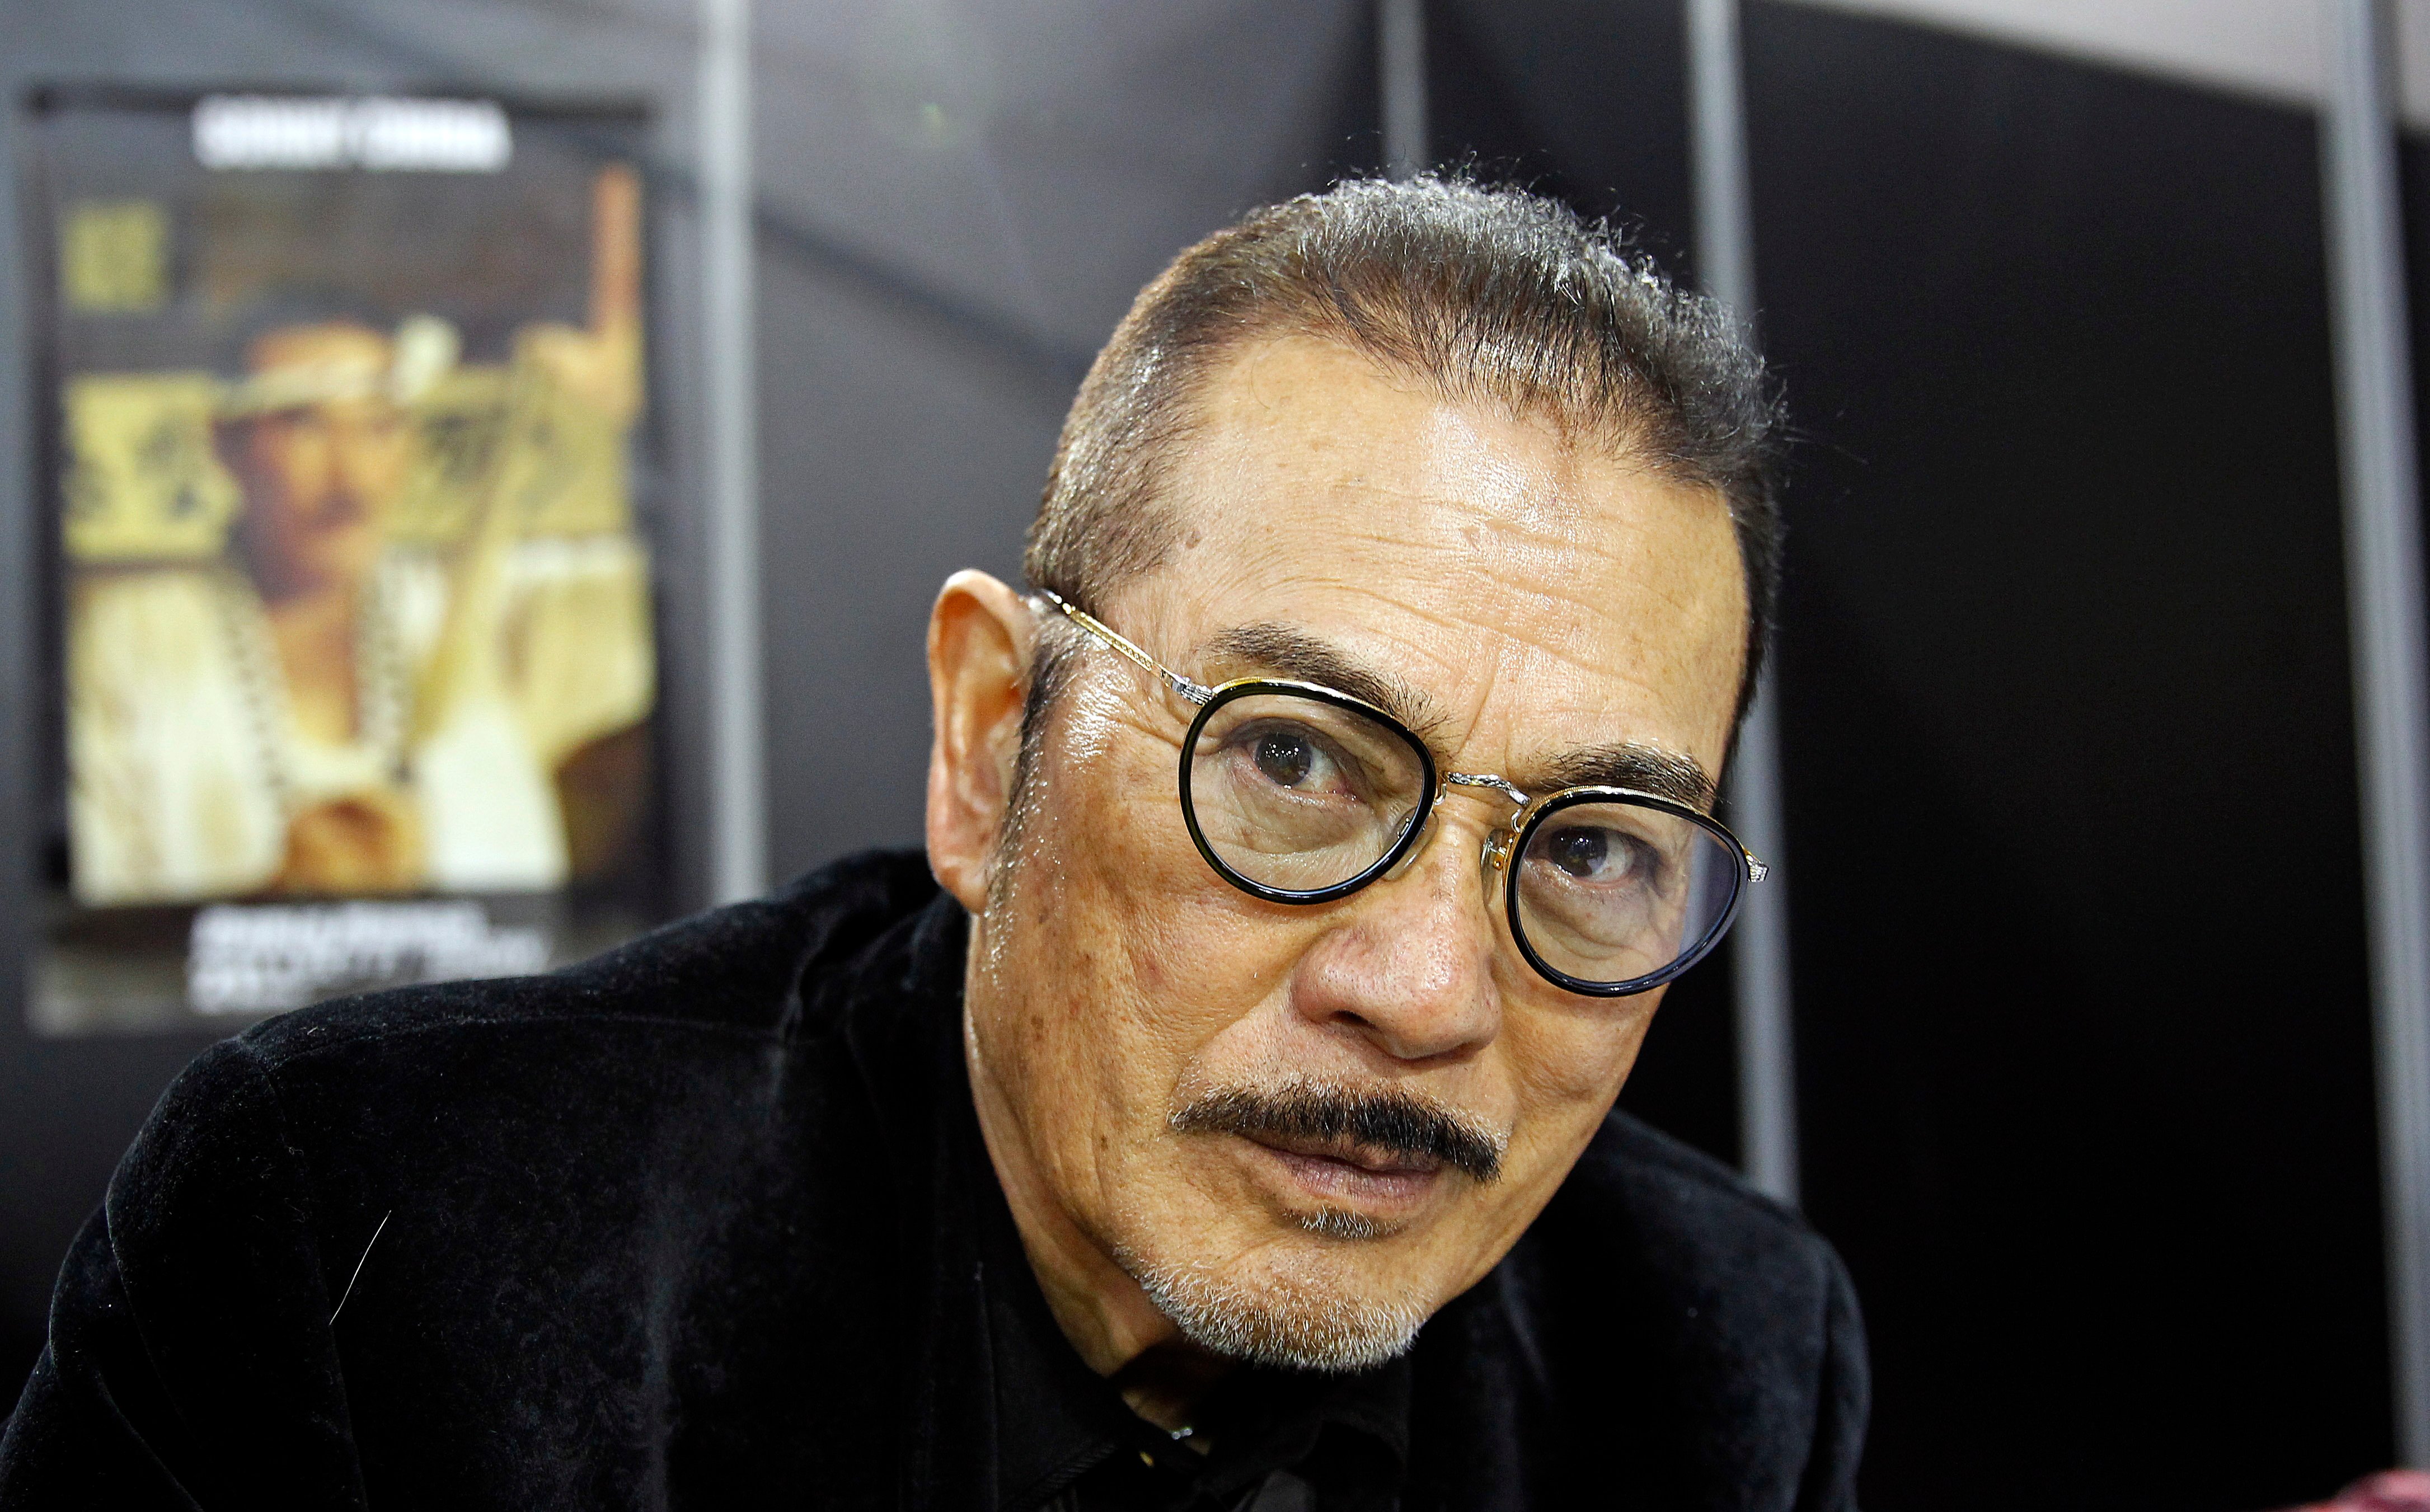 Sonny Chiba signs autographs at Paris Manga and Sci-Fi Show